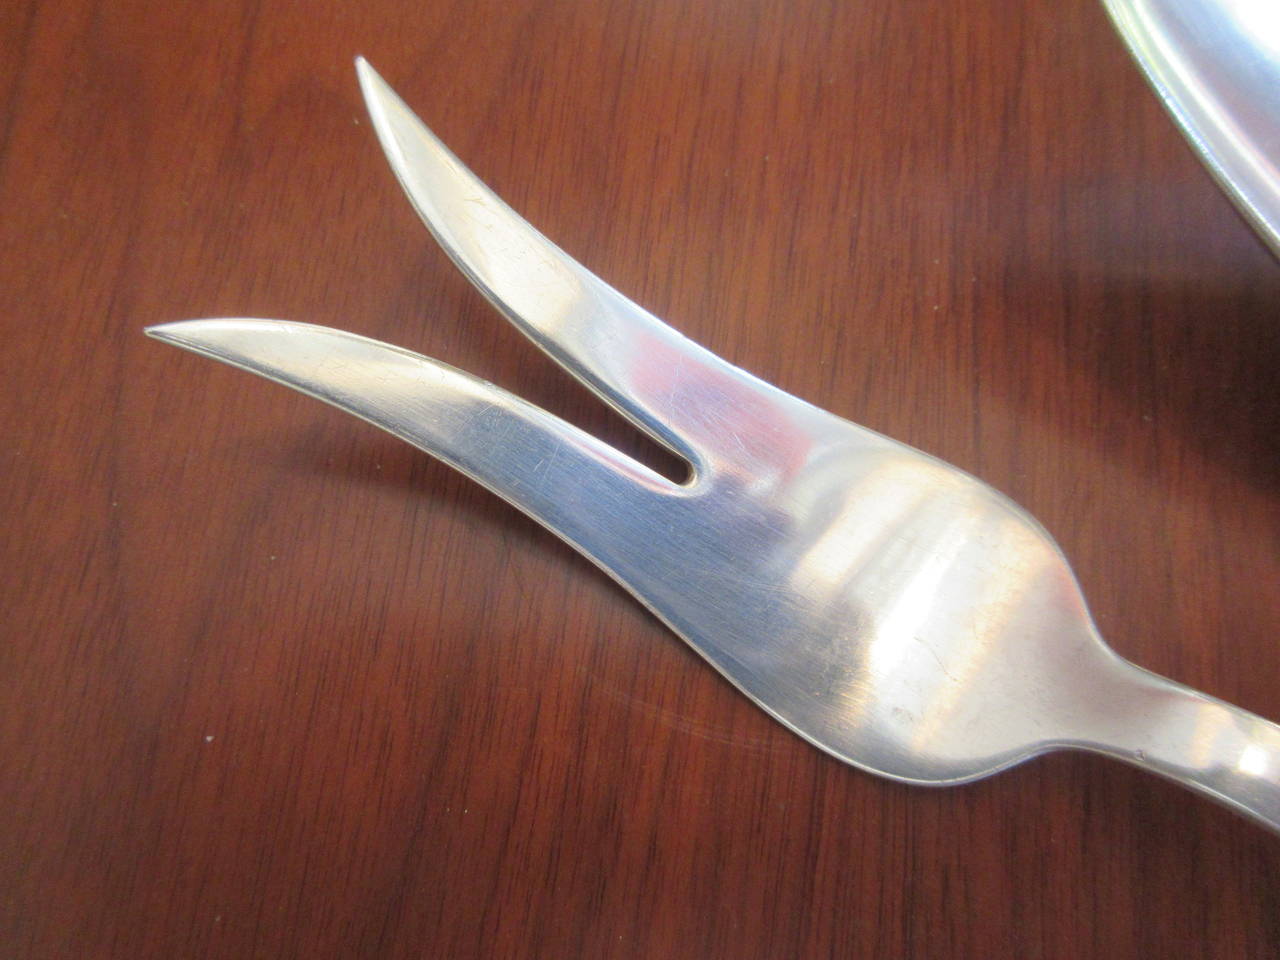 Serving fork and spoon. Sometimes called salad set or have seen listed as individual serving pieces! Each piece priced per item. Measures 10.25 inches long. Very nice condition!